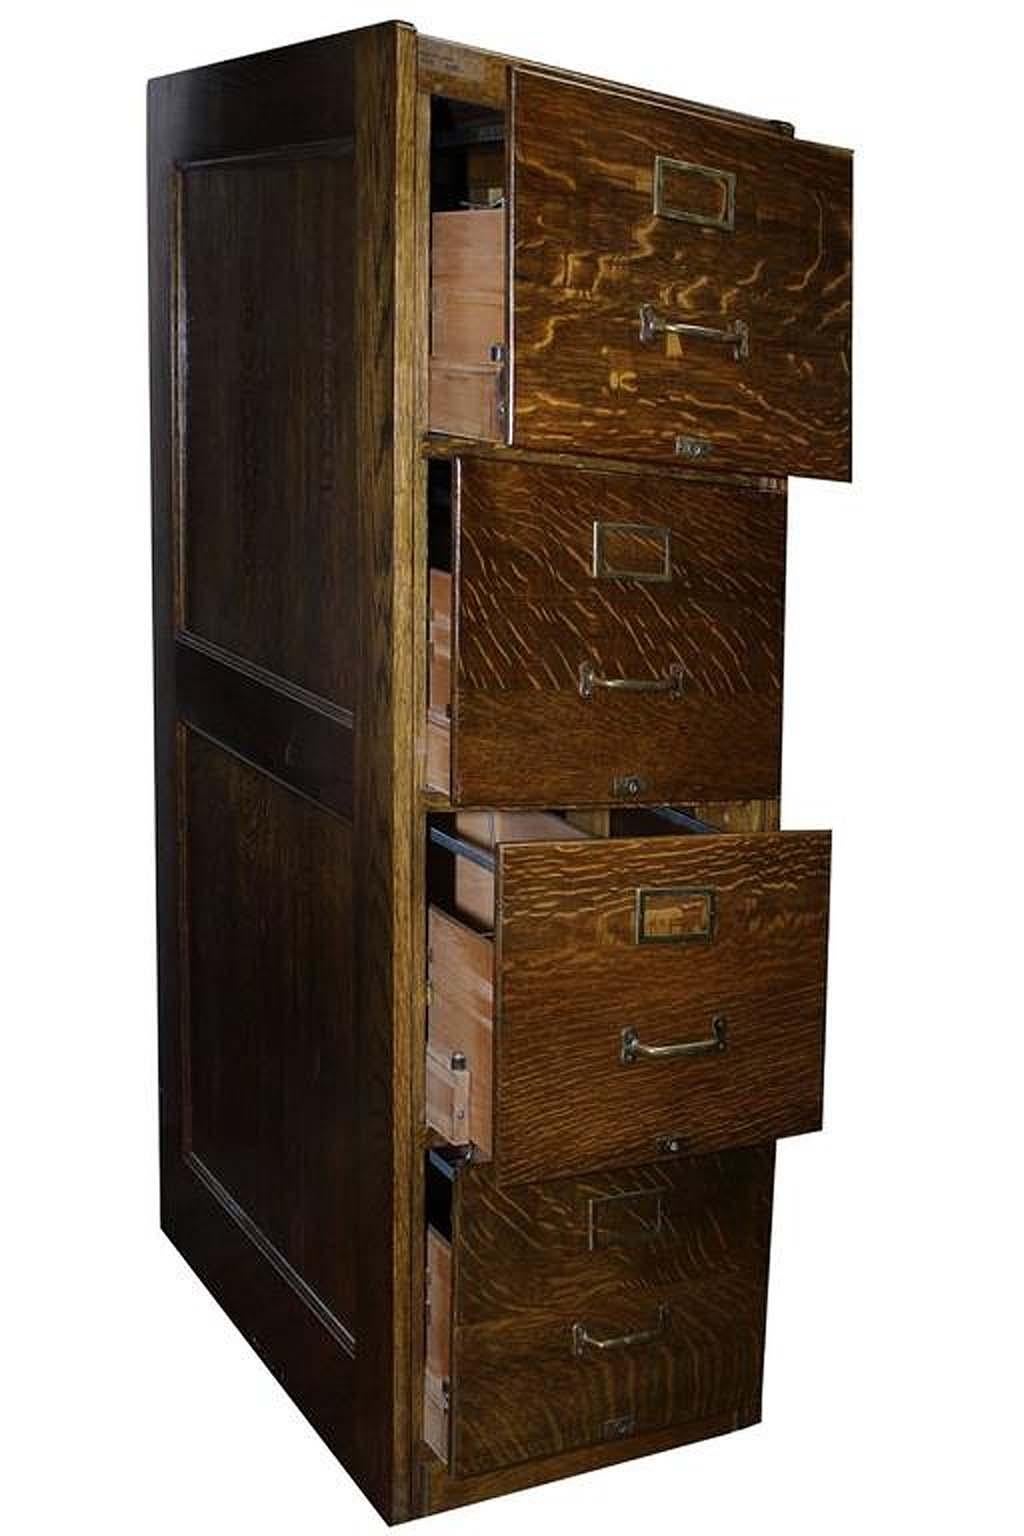 Mint condition quarter sawn oak file cabinet. This piece is in such good condition it is hard to believe. Inside and out is it near perfect, It has been refinished in the last 20 years and done really well. Original Brass handles and details, four